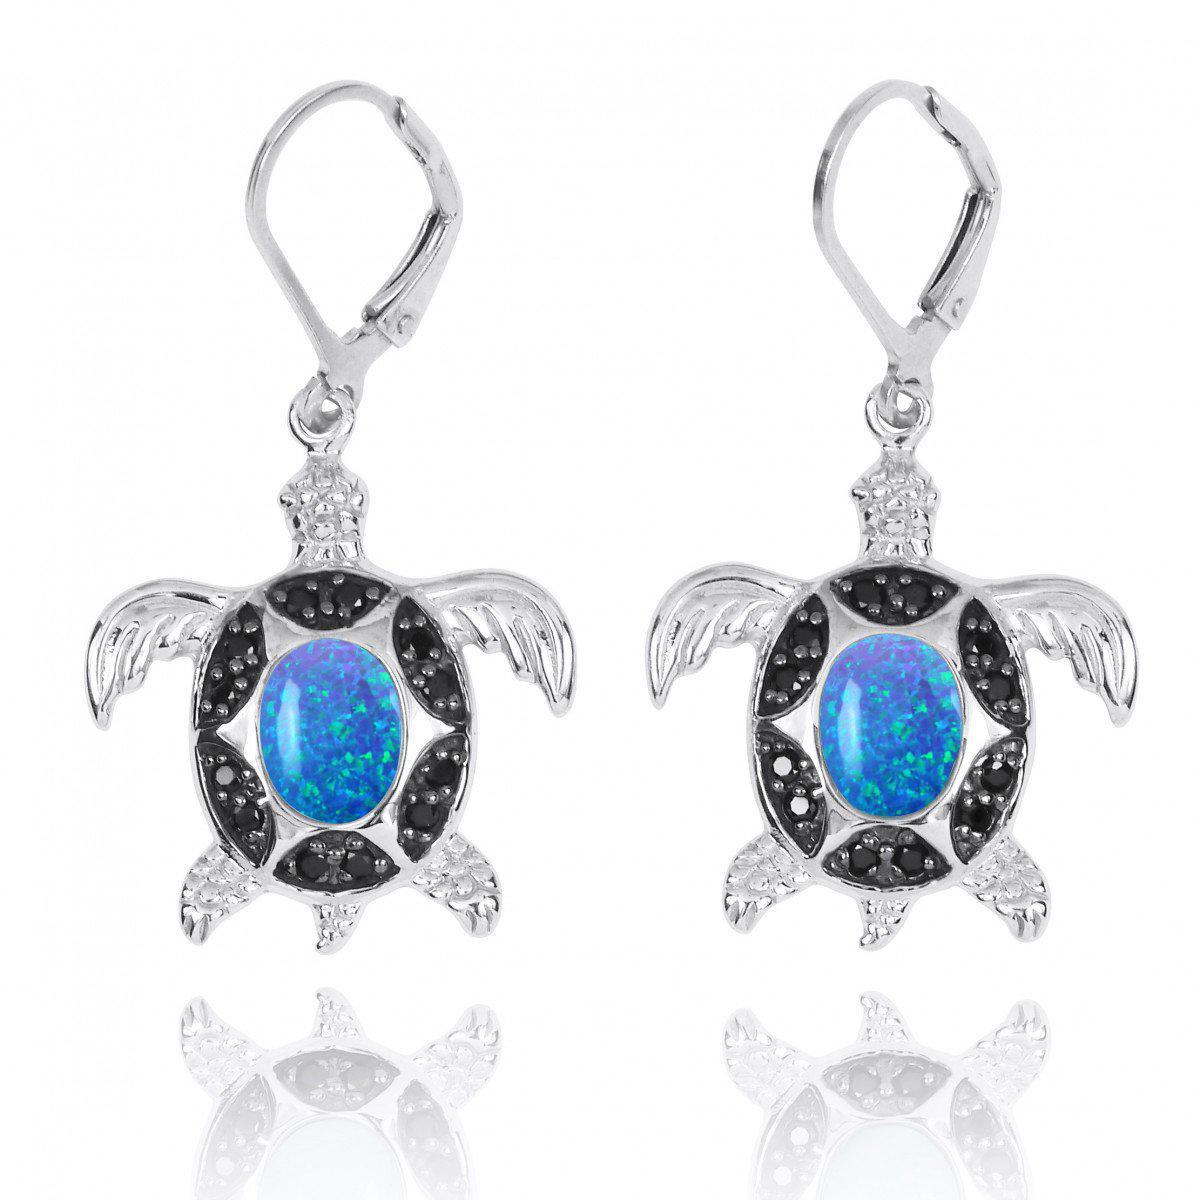 Sea Turtle Earrings with Blue Opal and Black Spinel